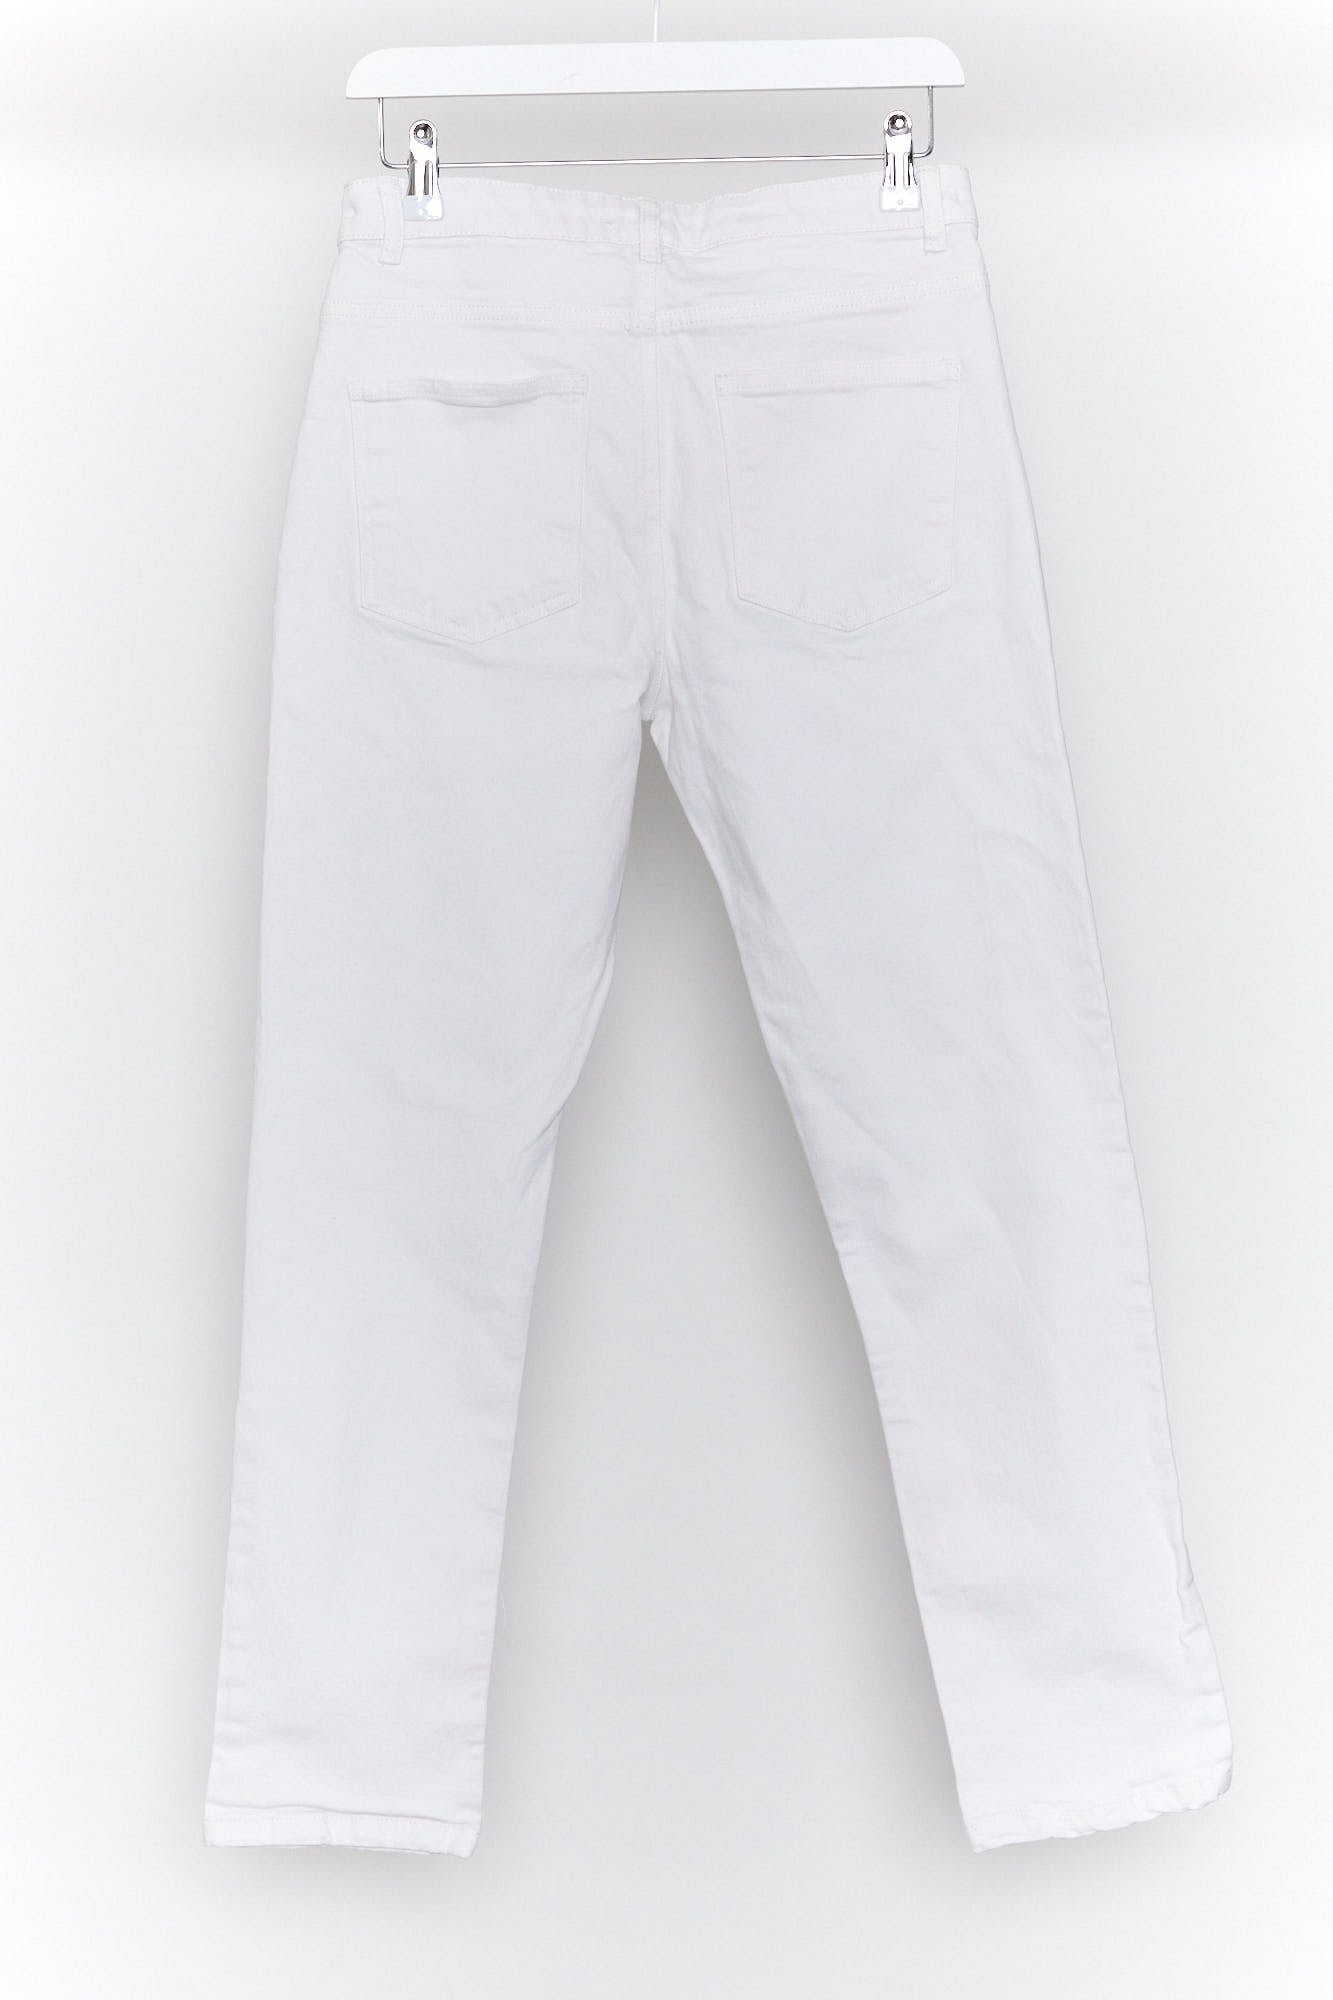 Next white jeans size 28" waist or small